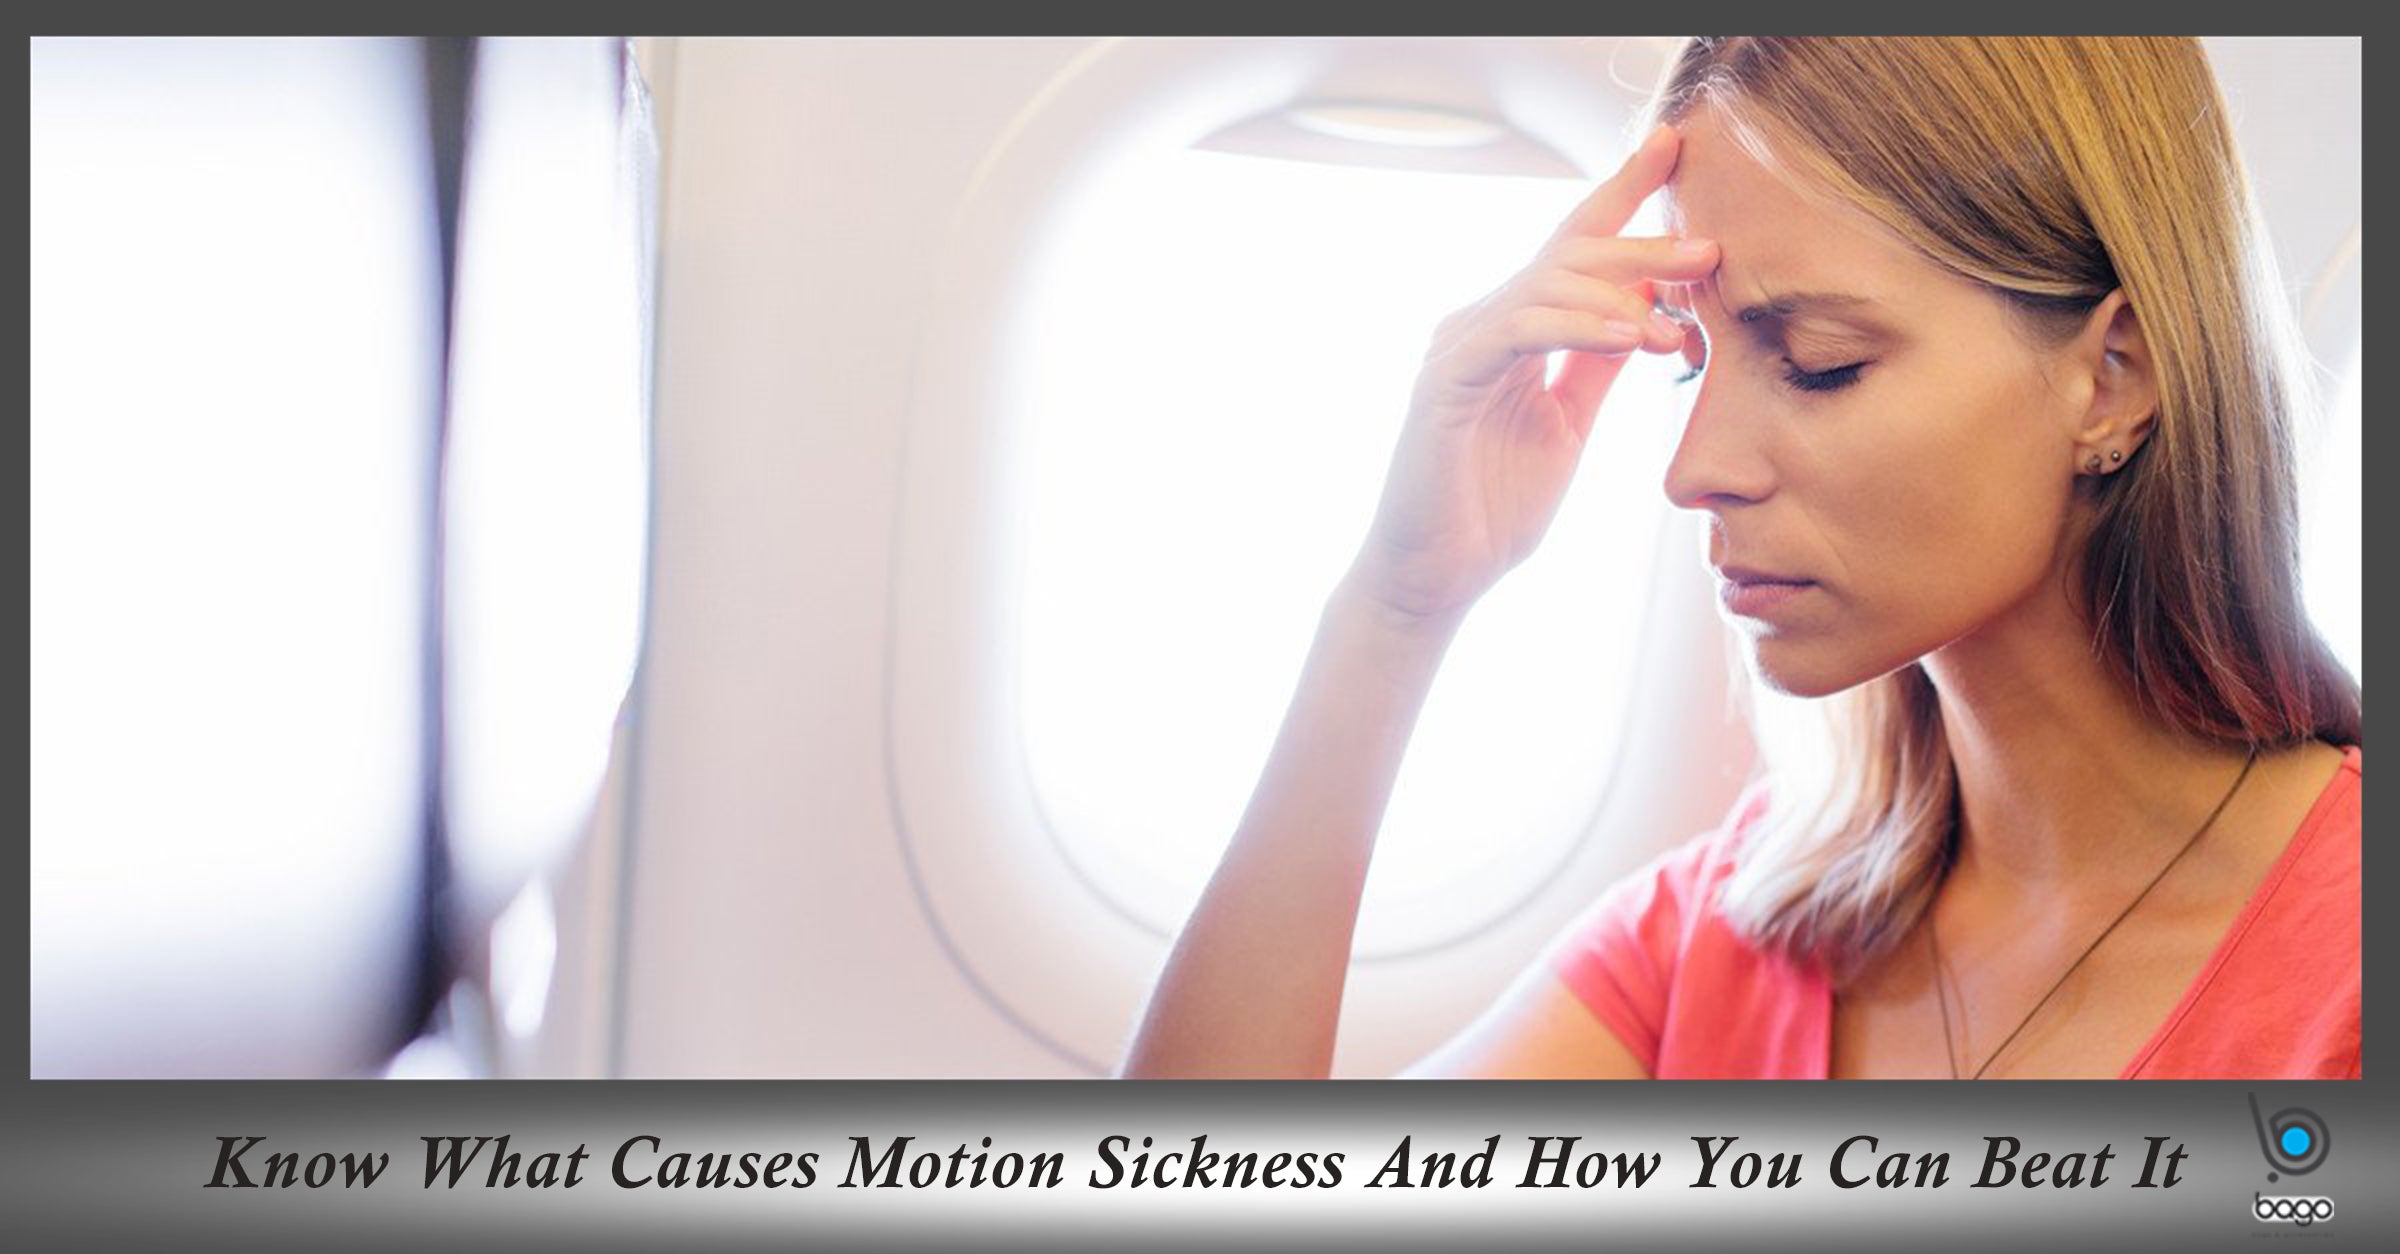 Know What Causes Motion Sickness and How You Can Beat It